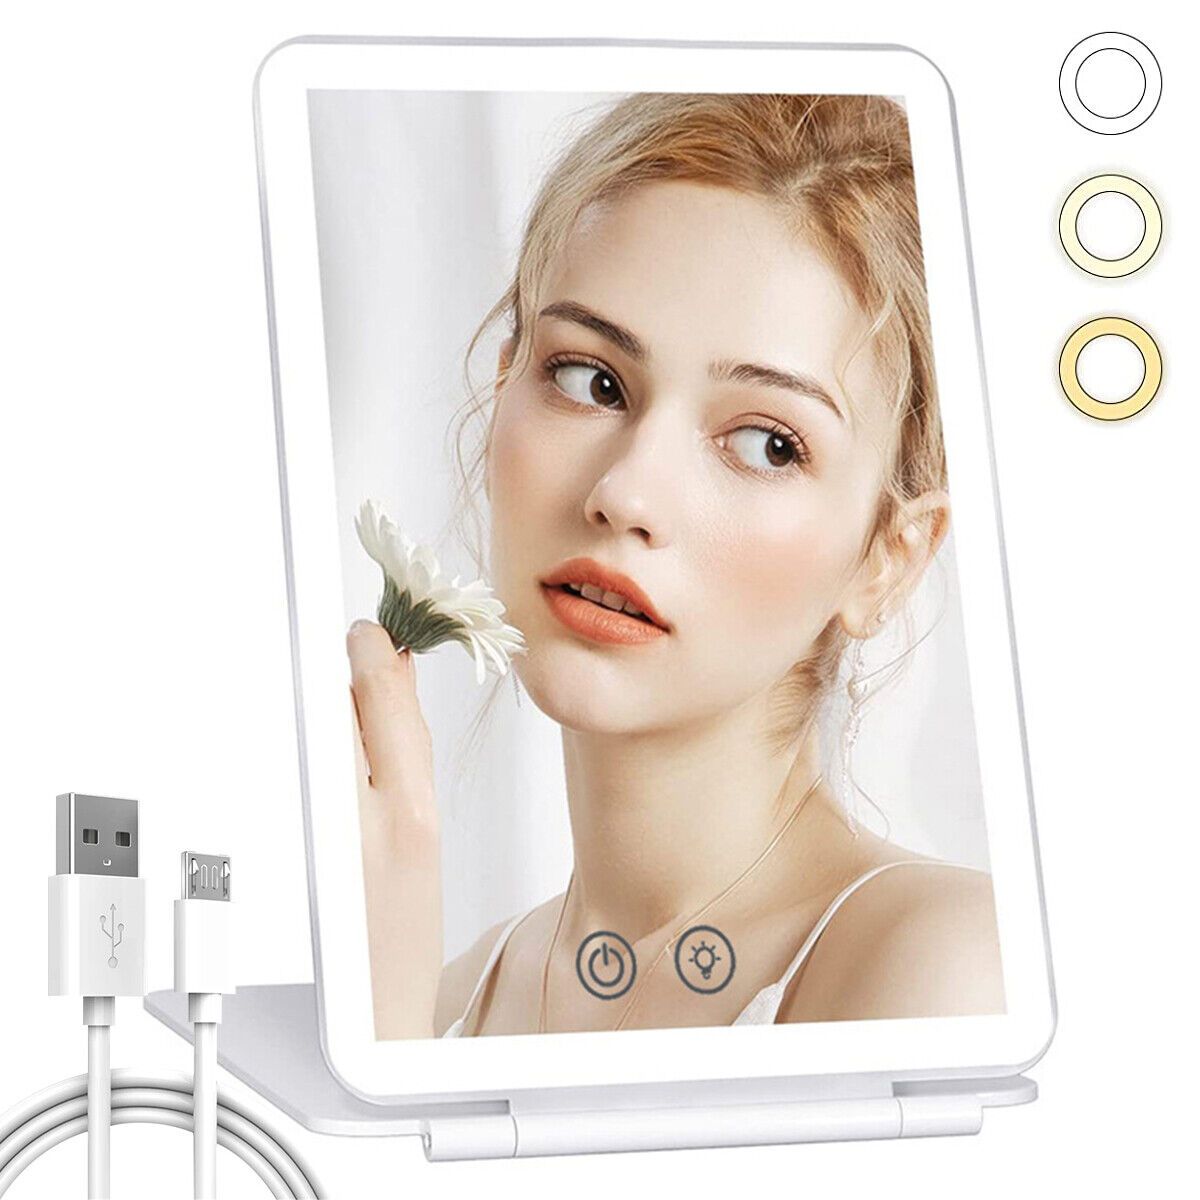 Touch Screen LED Makeup Mirror - Foldable, 3-Color Lighting, USB Rechargeable 